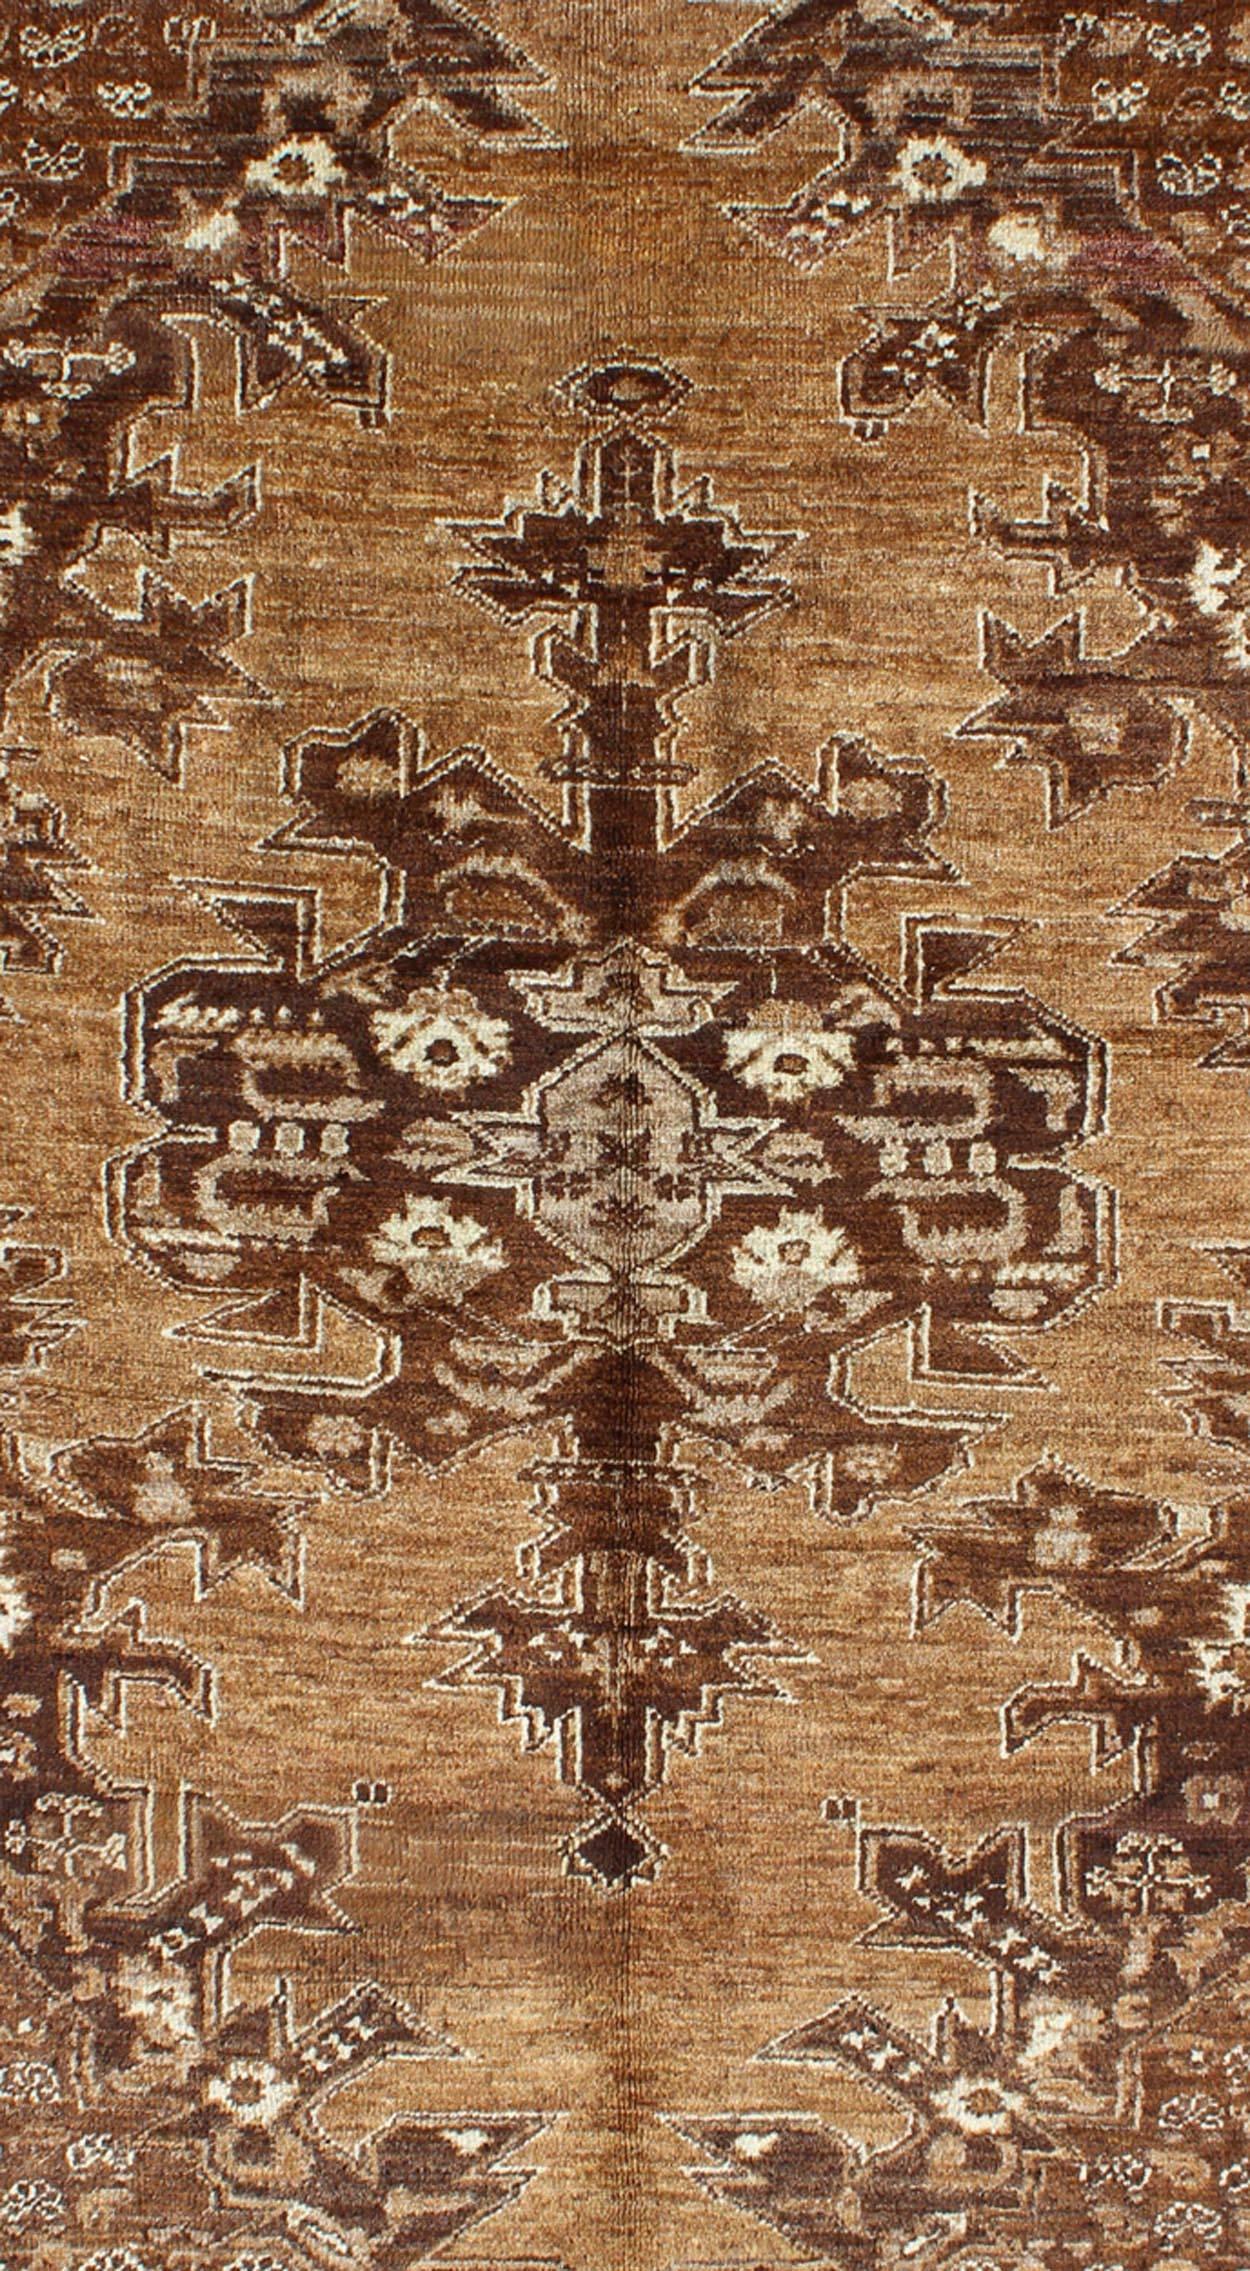 Hand-Knotted Brown & Caramel Tones Antique Turkish Oushak Rug With Multi-Layered Medallion